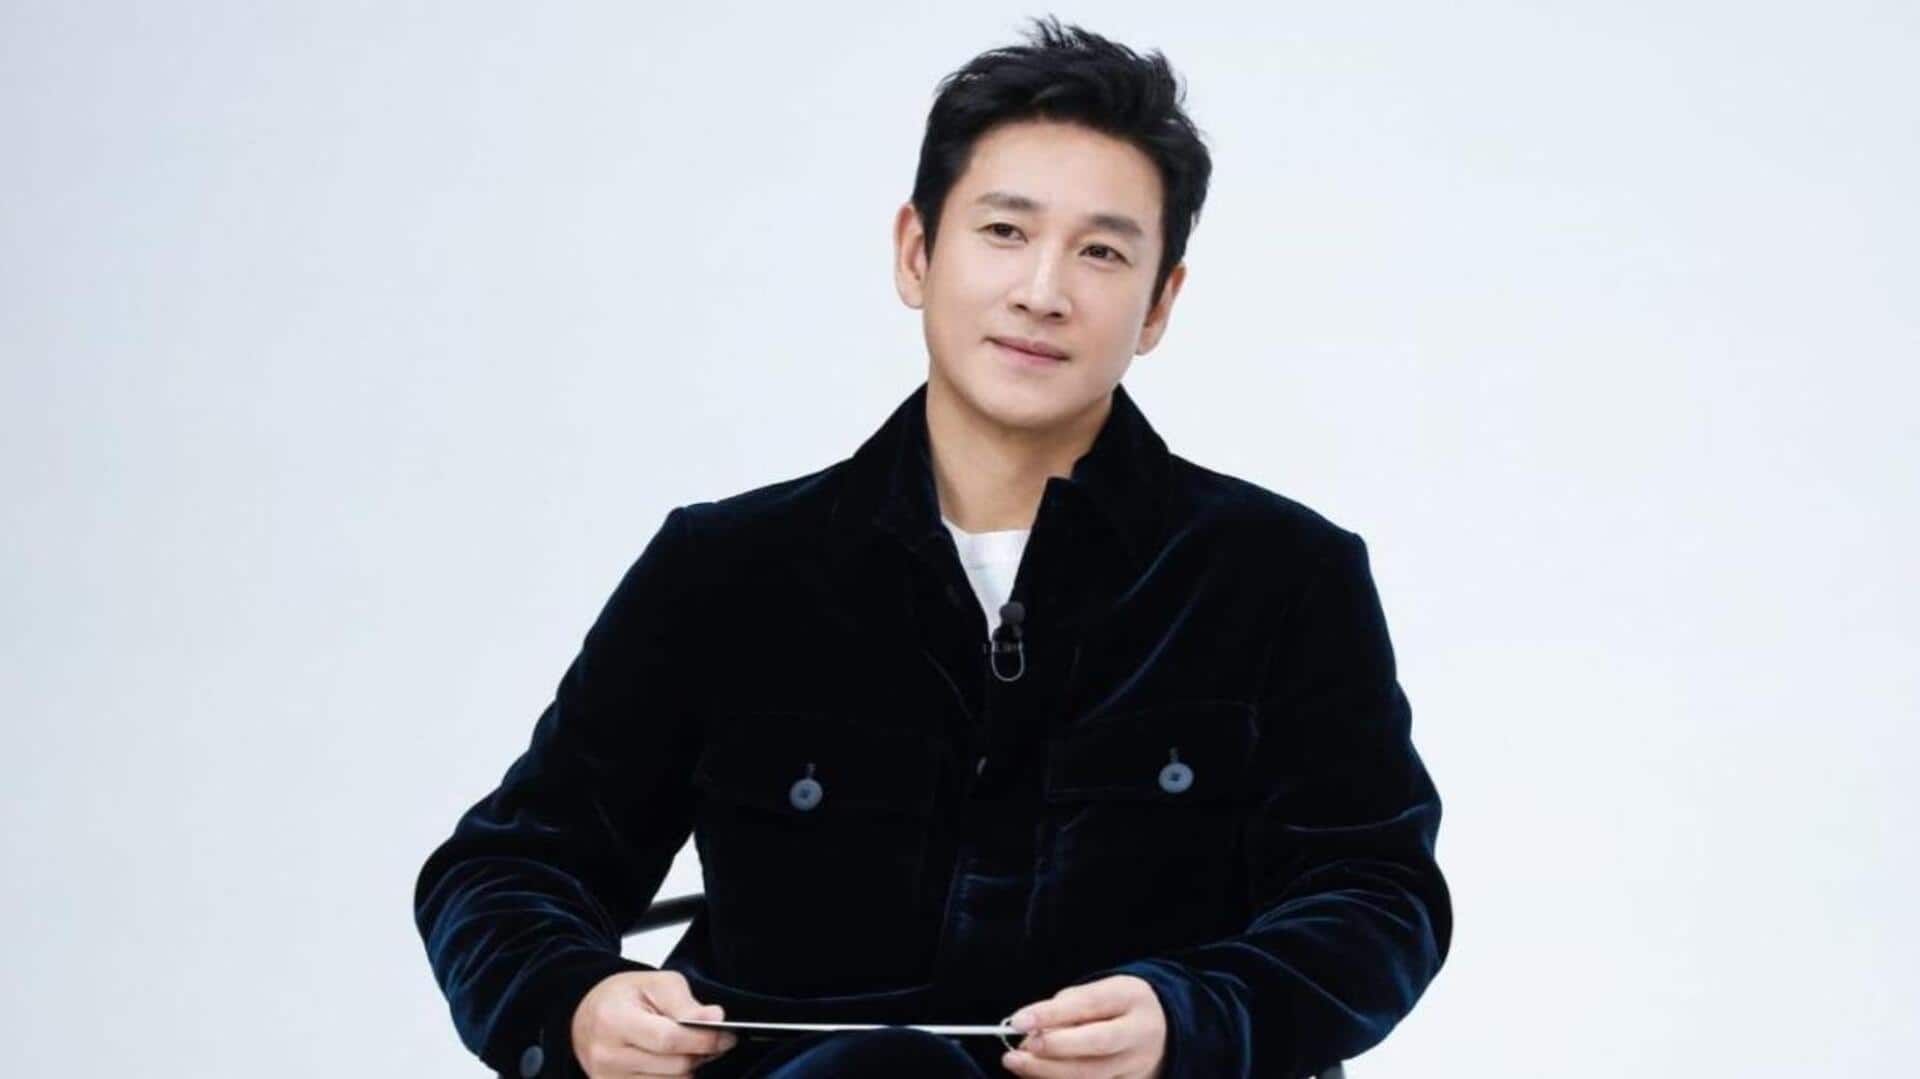 'Parasite' actor Lee Sun-kyun accused in drug abuse case